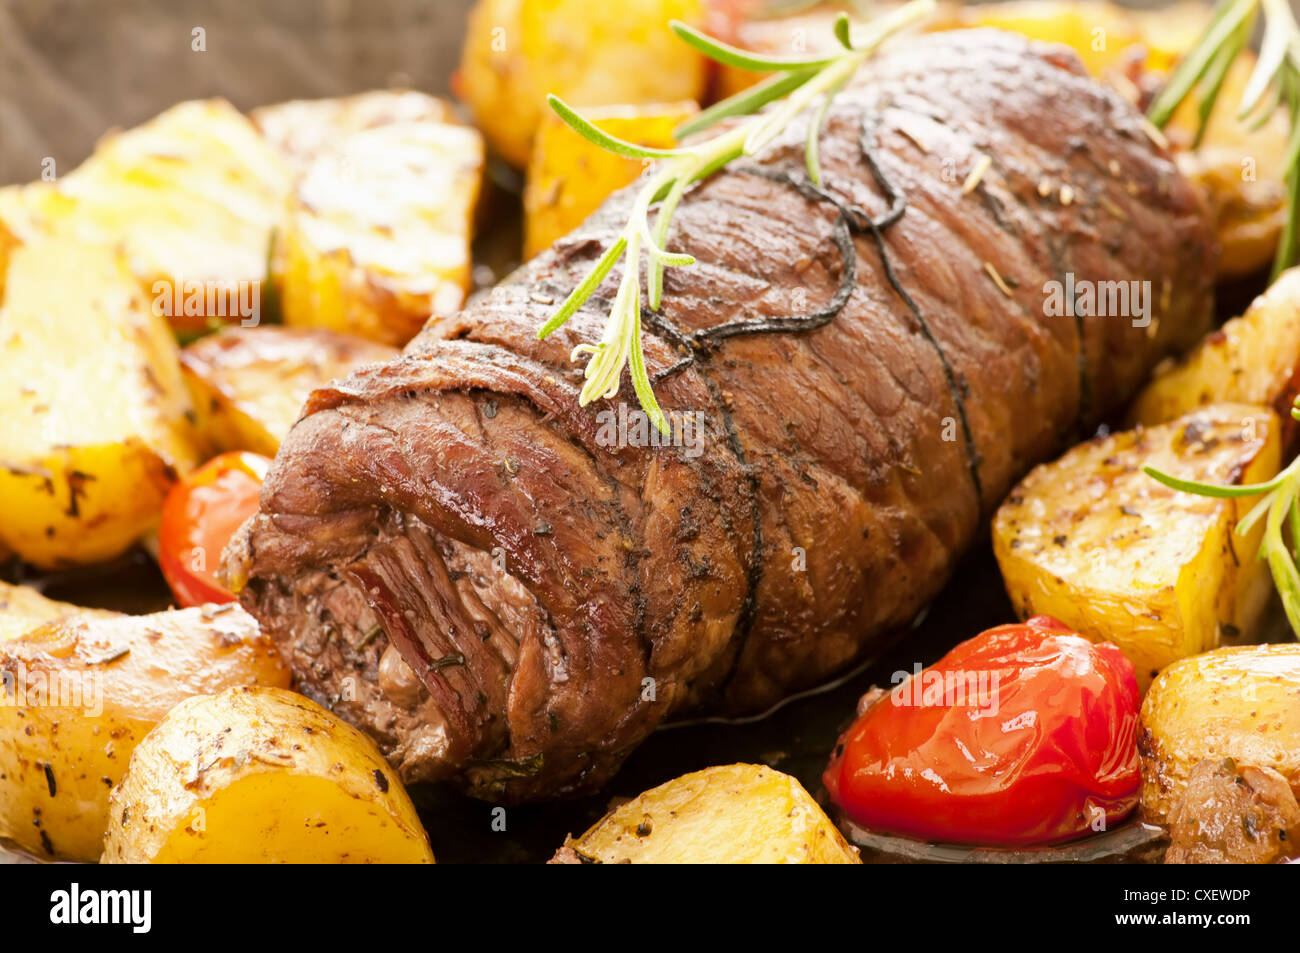 Beef roulade with roasted potato and tomato Stock Photo